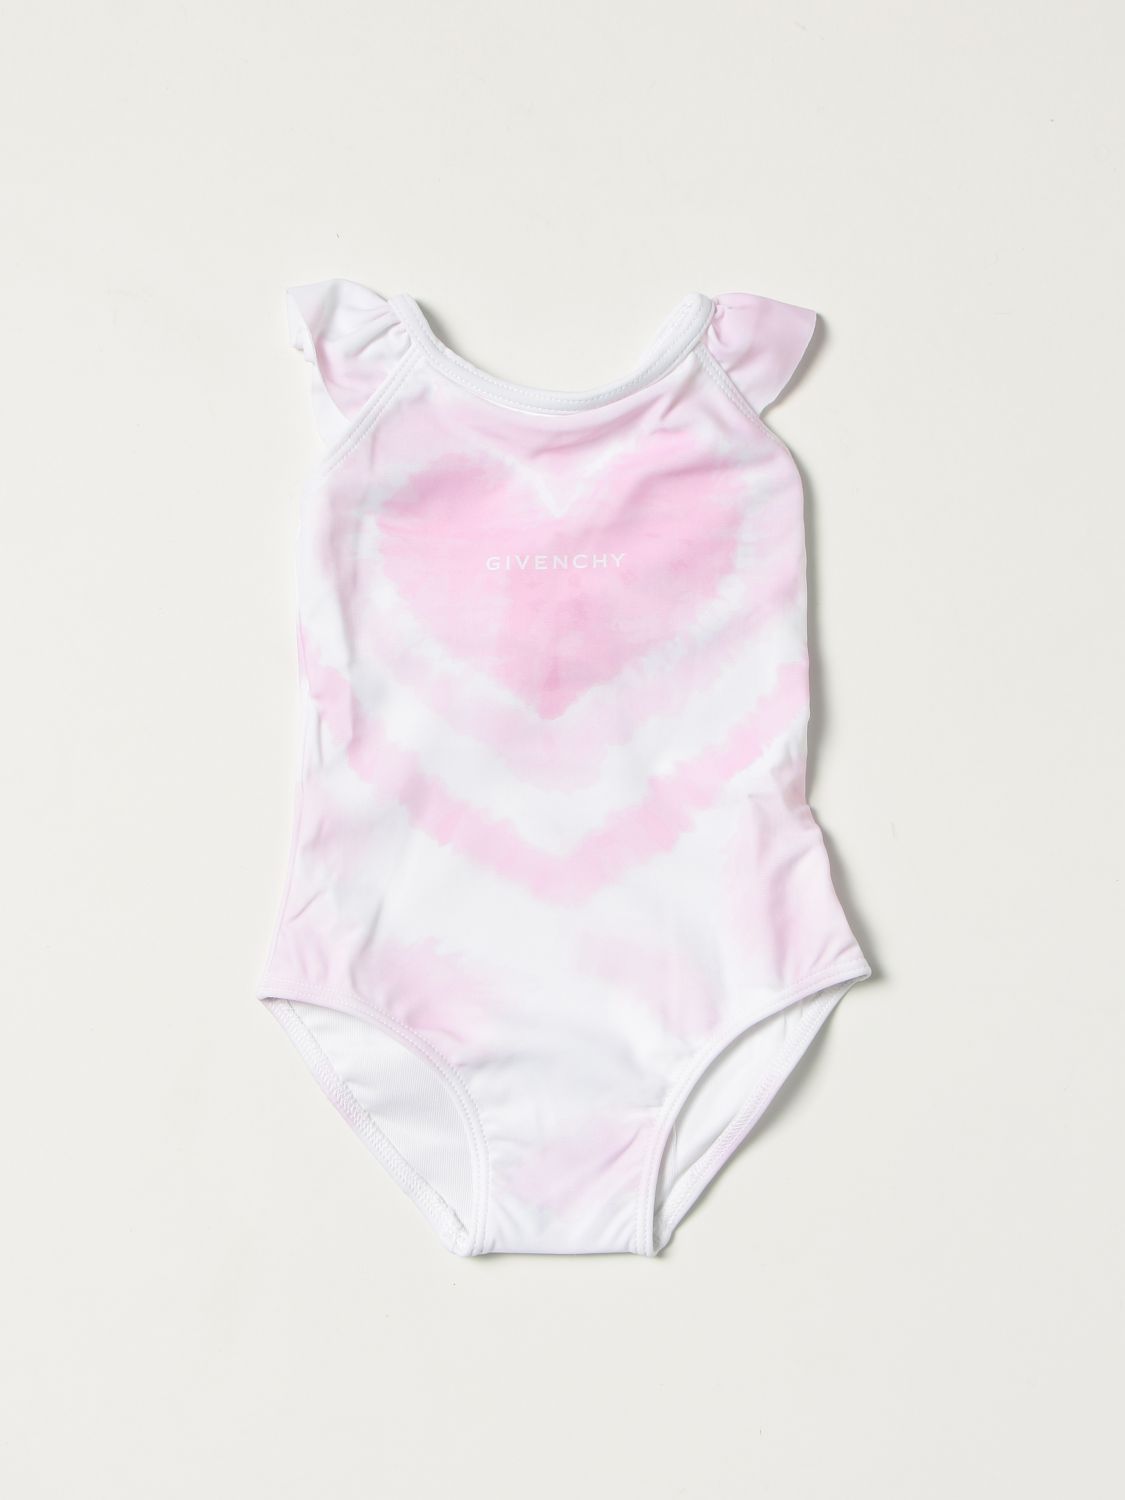 Costume Givenchy: Costume intero Givenchy con stampa tie dye rosa 1